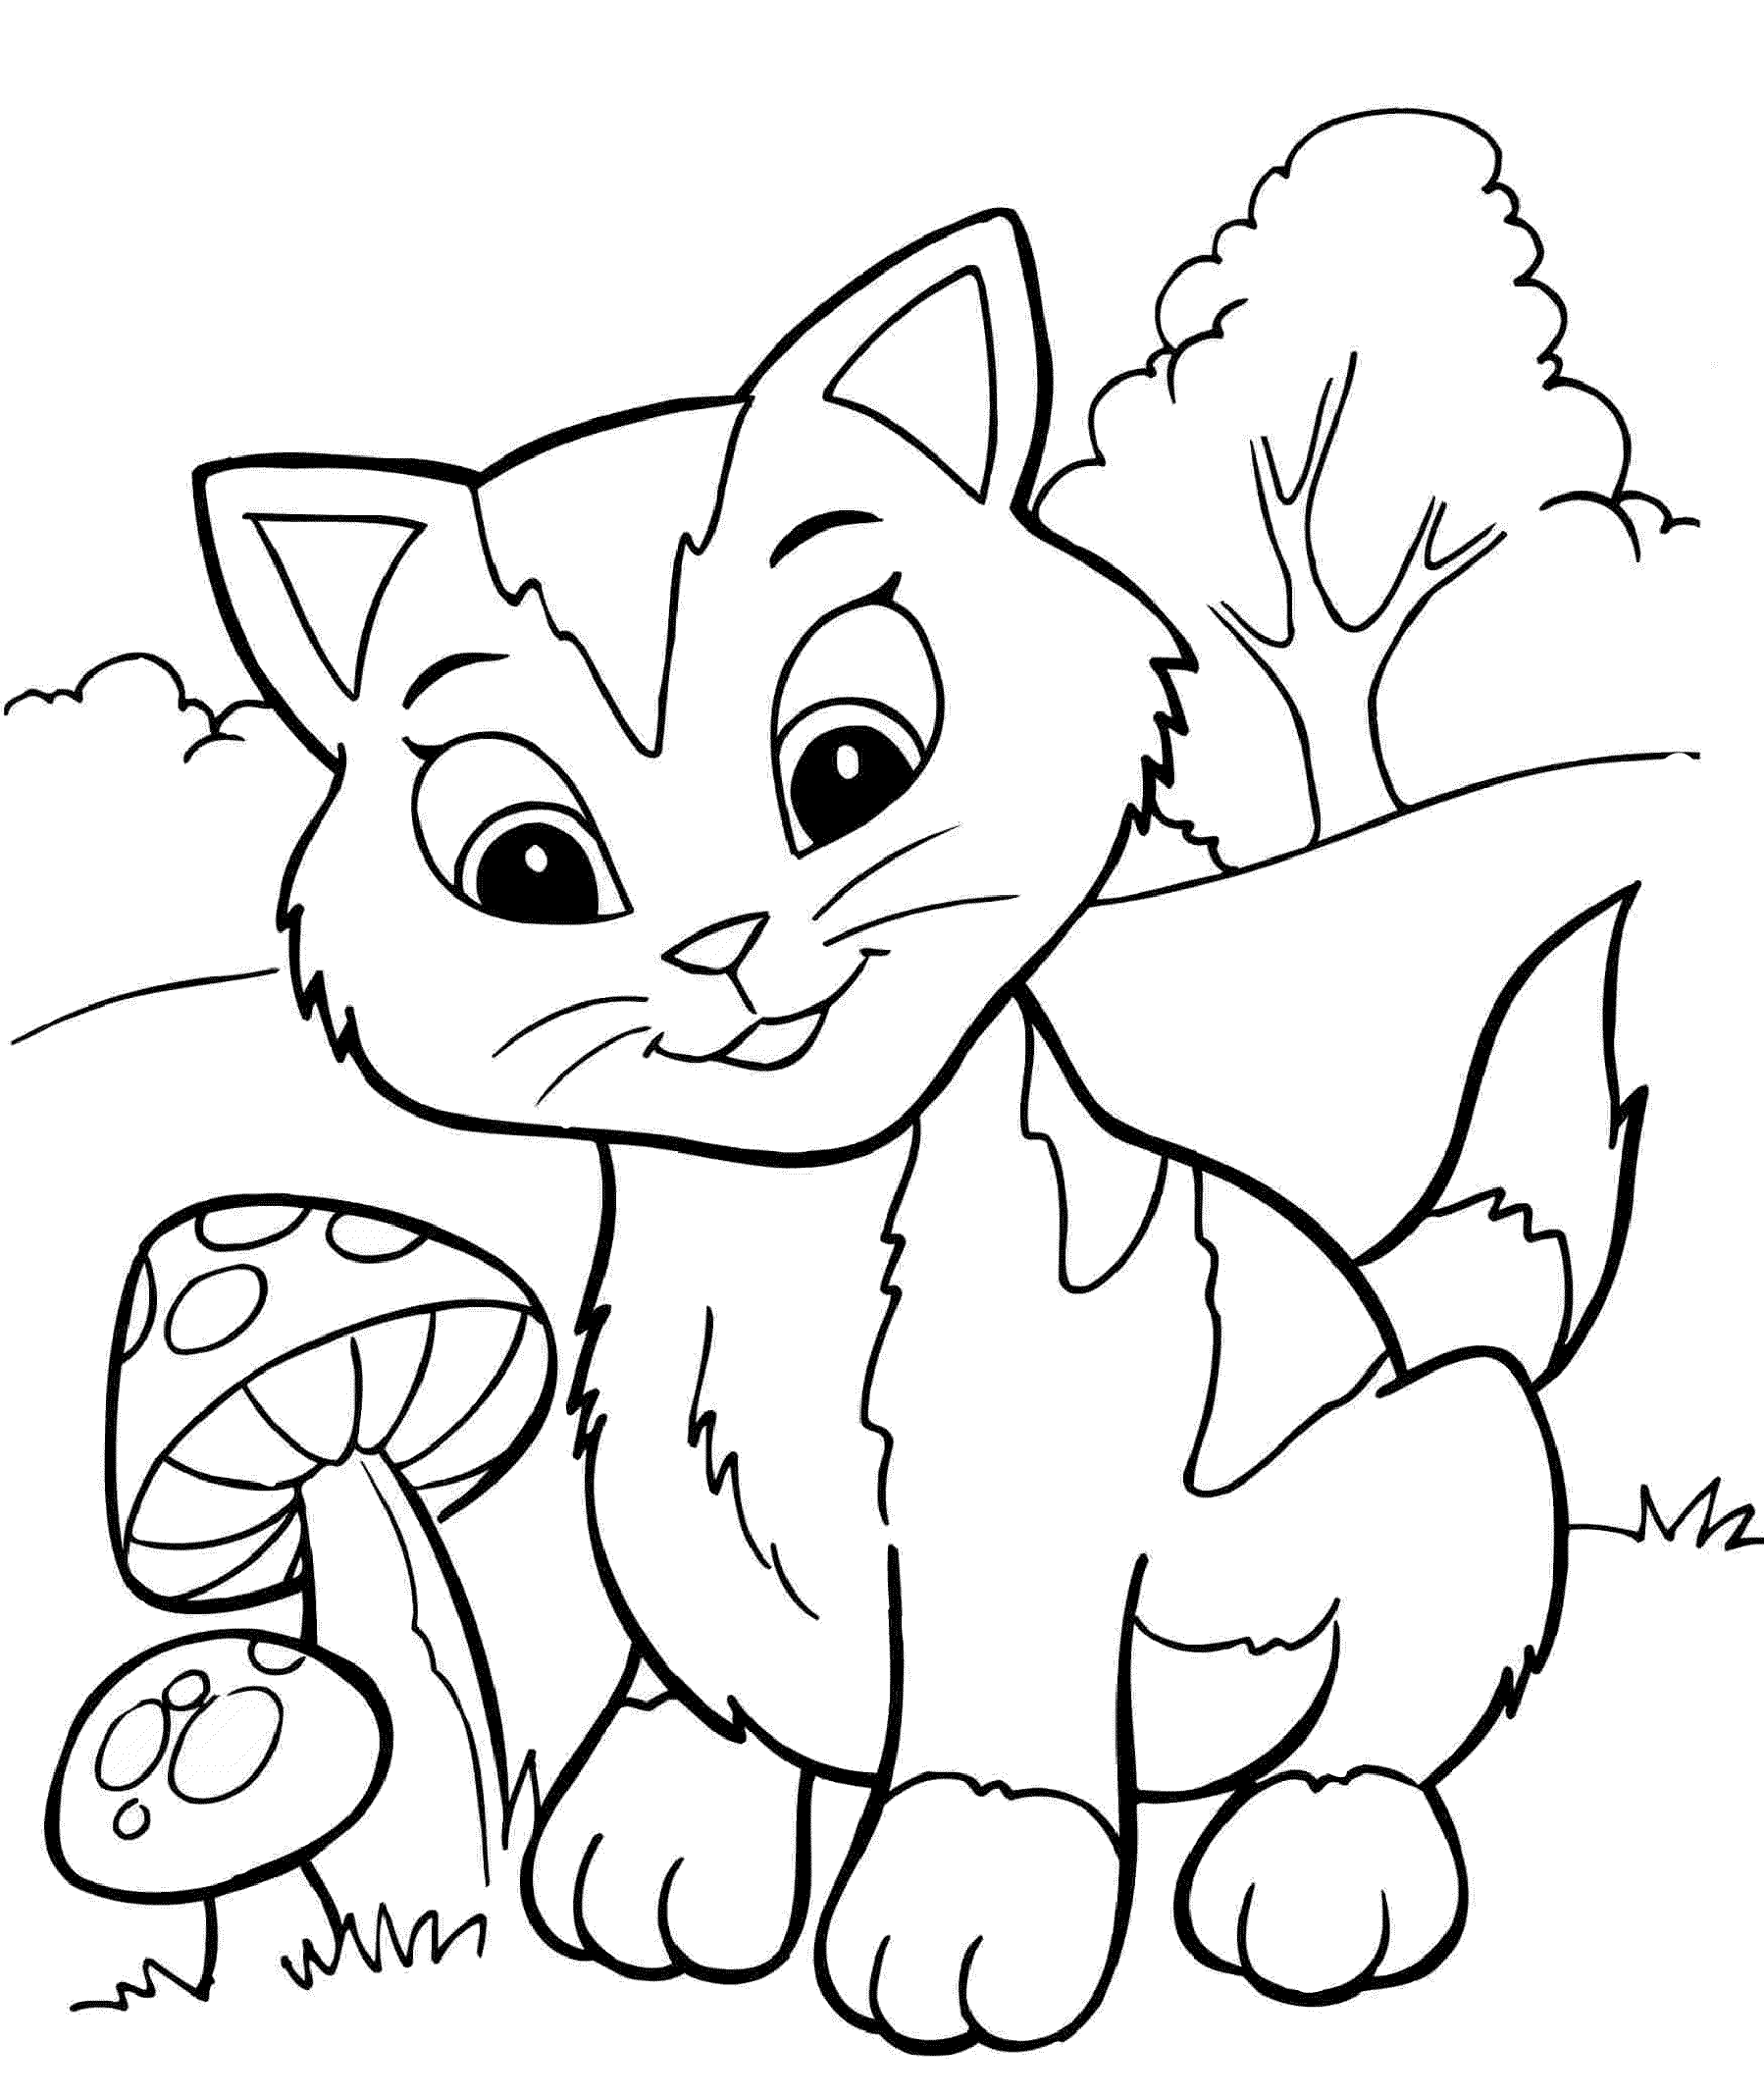 Printable curious little cat coloring pages, cat looking at mushrooms